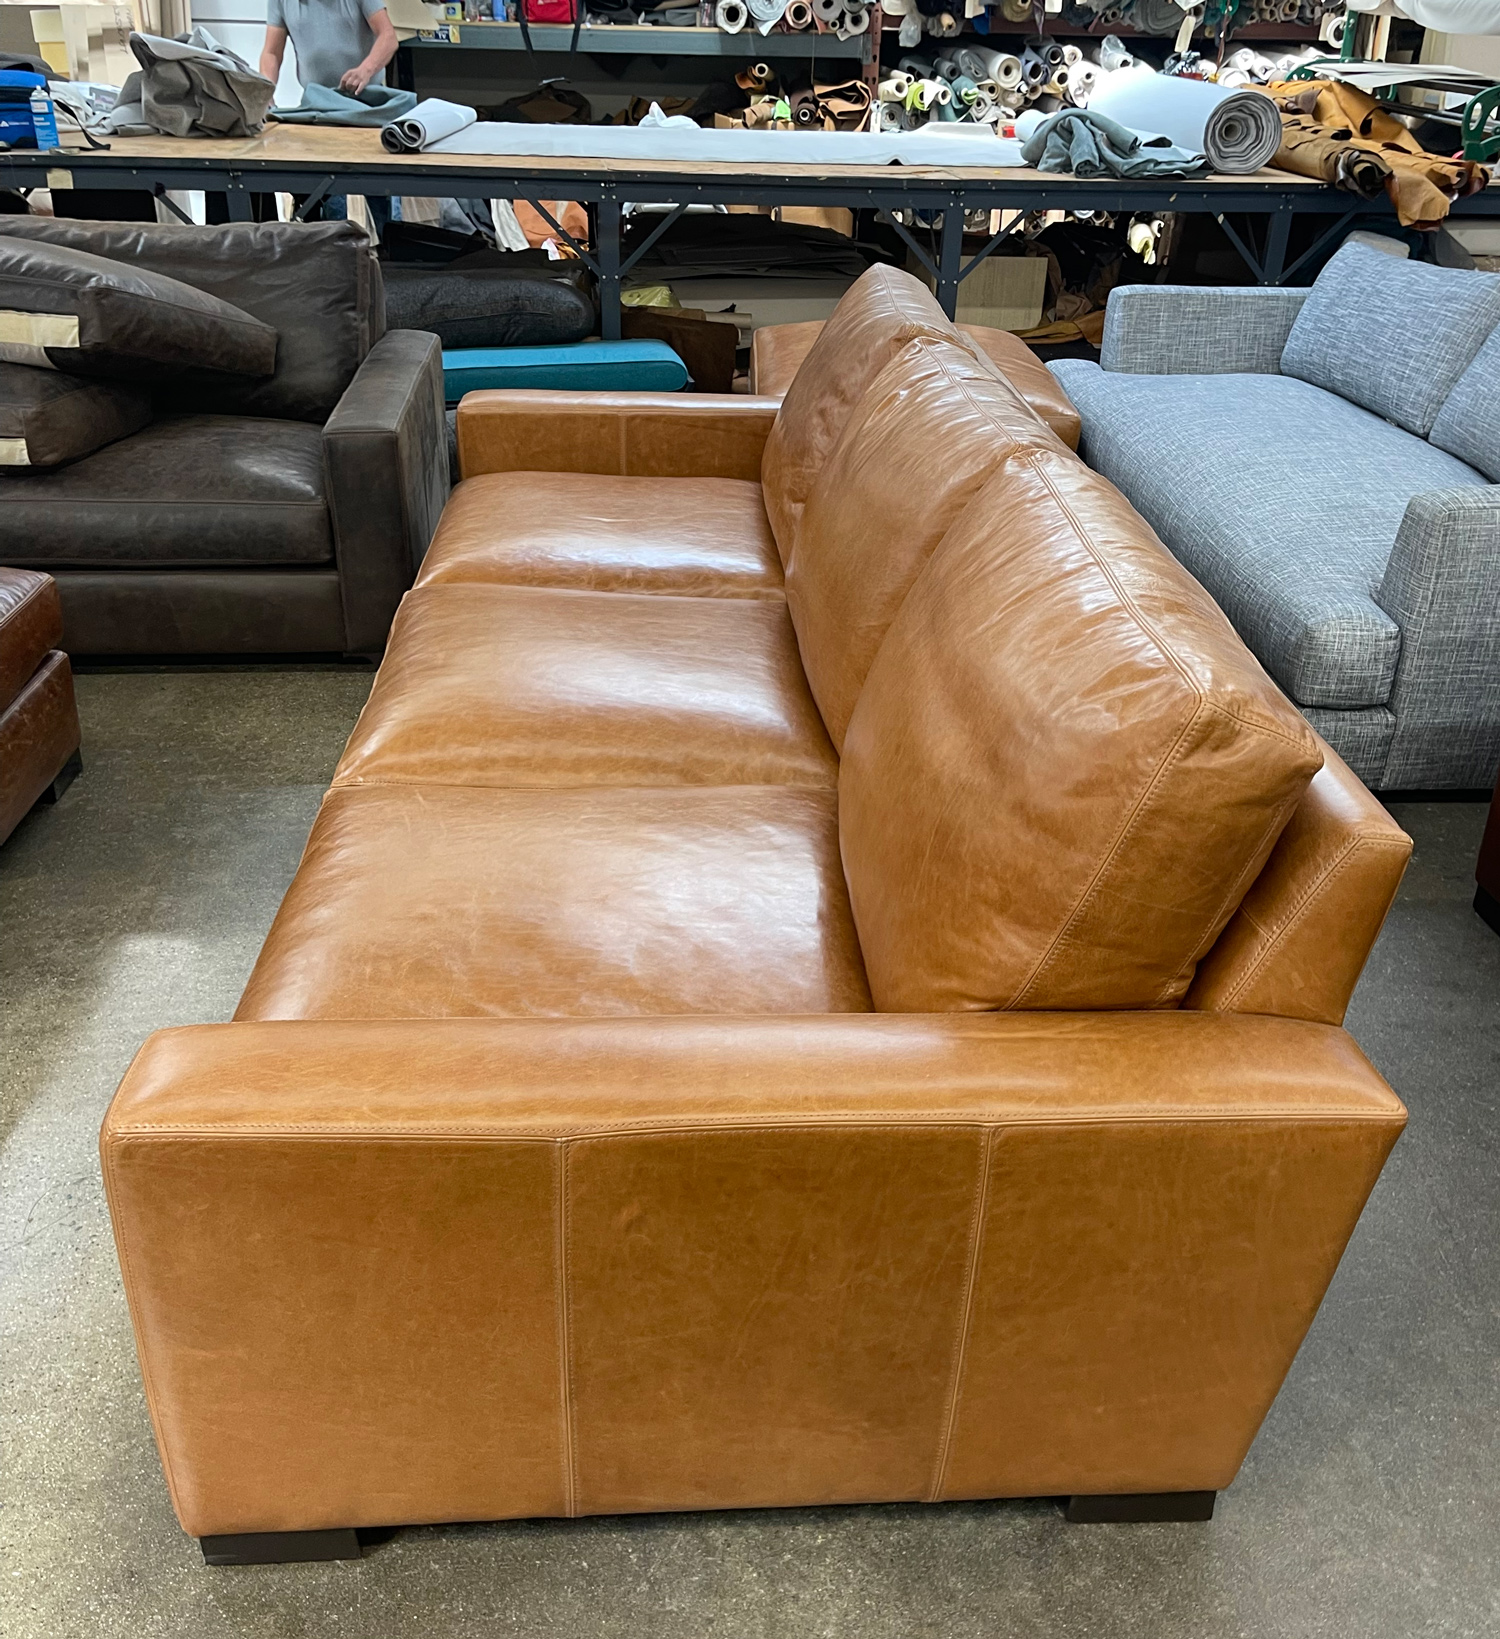 Braxton 108" x 46" Sofa in Mont Blanc Sycamore Leather - side view